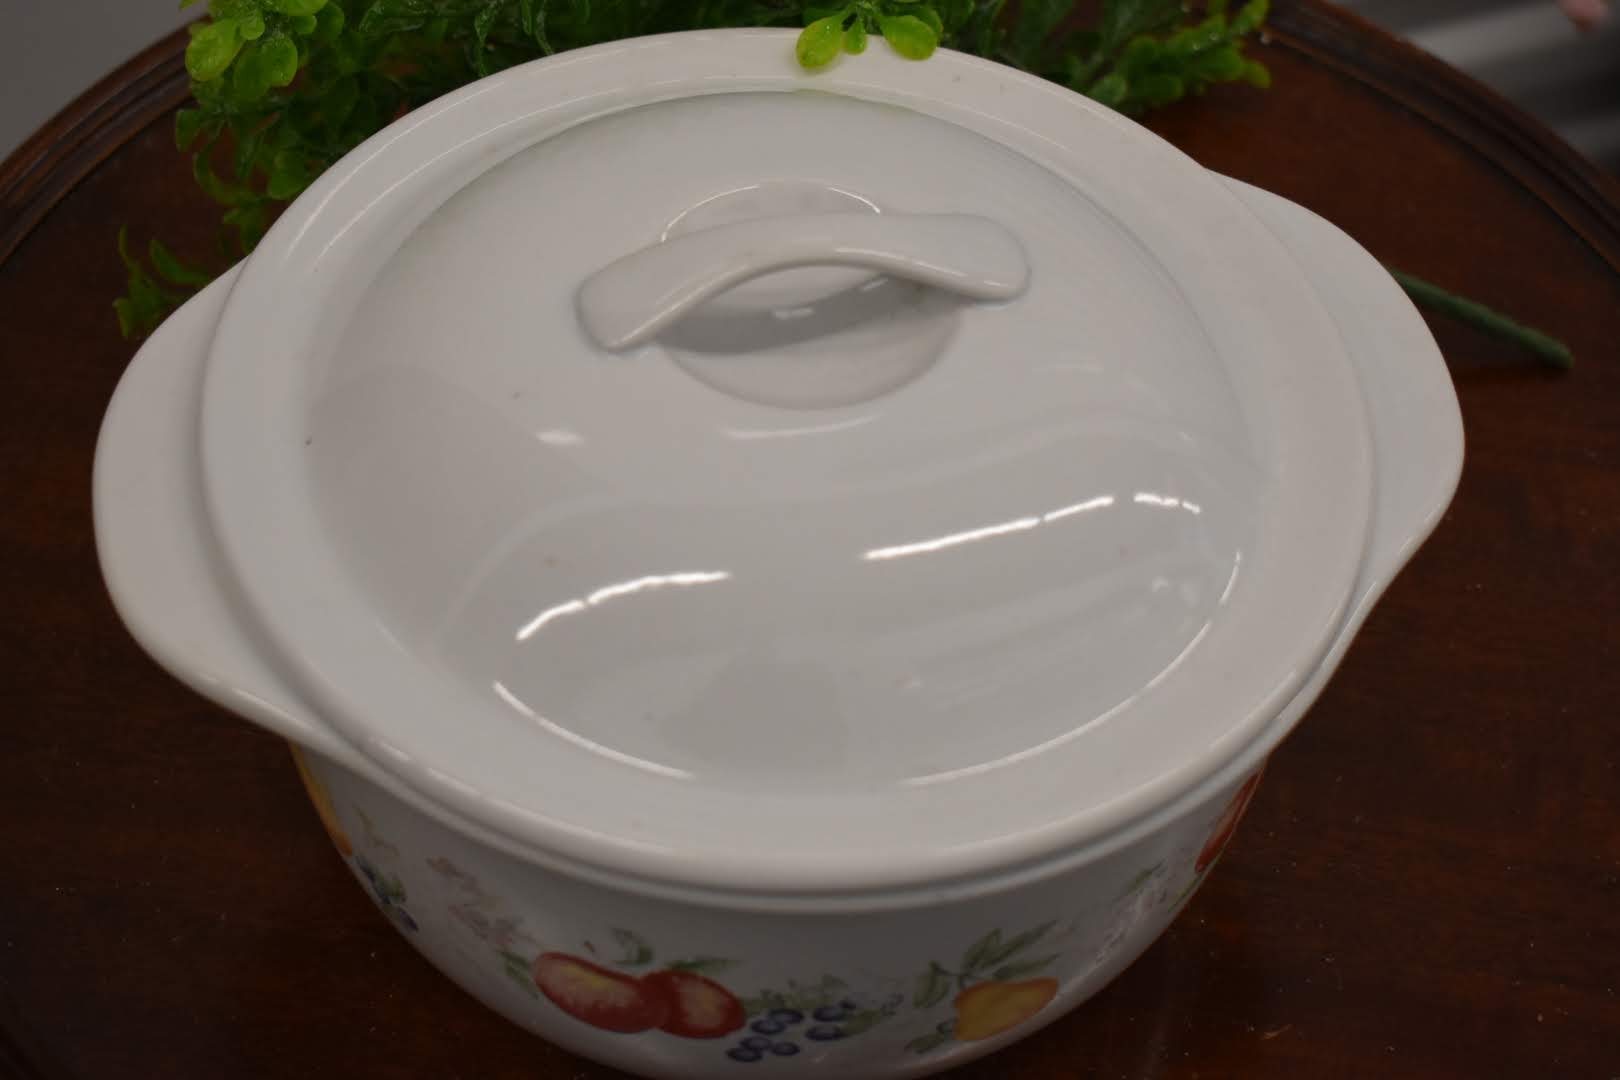 Corelle - Bright White Yellow Brown Color - Casserole Dish With Lid - Peaches and Berries Pattern